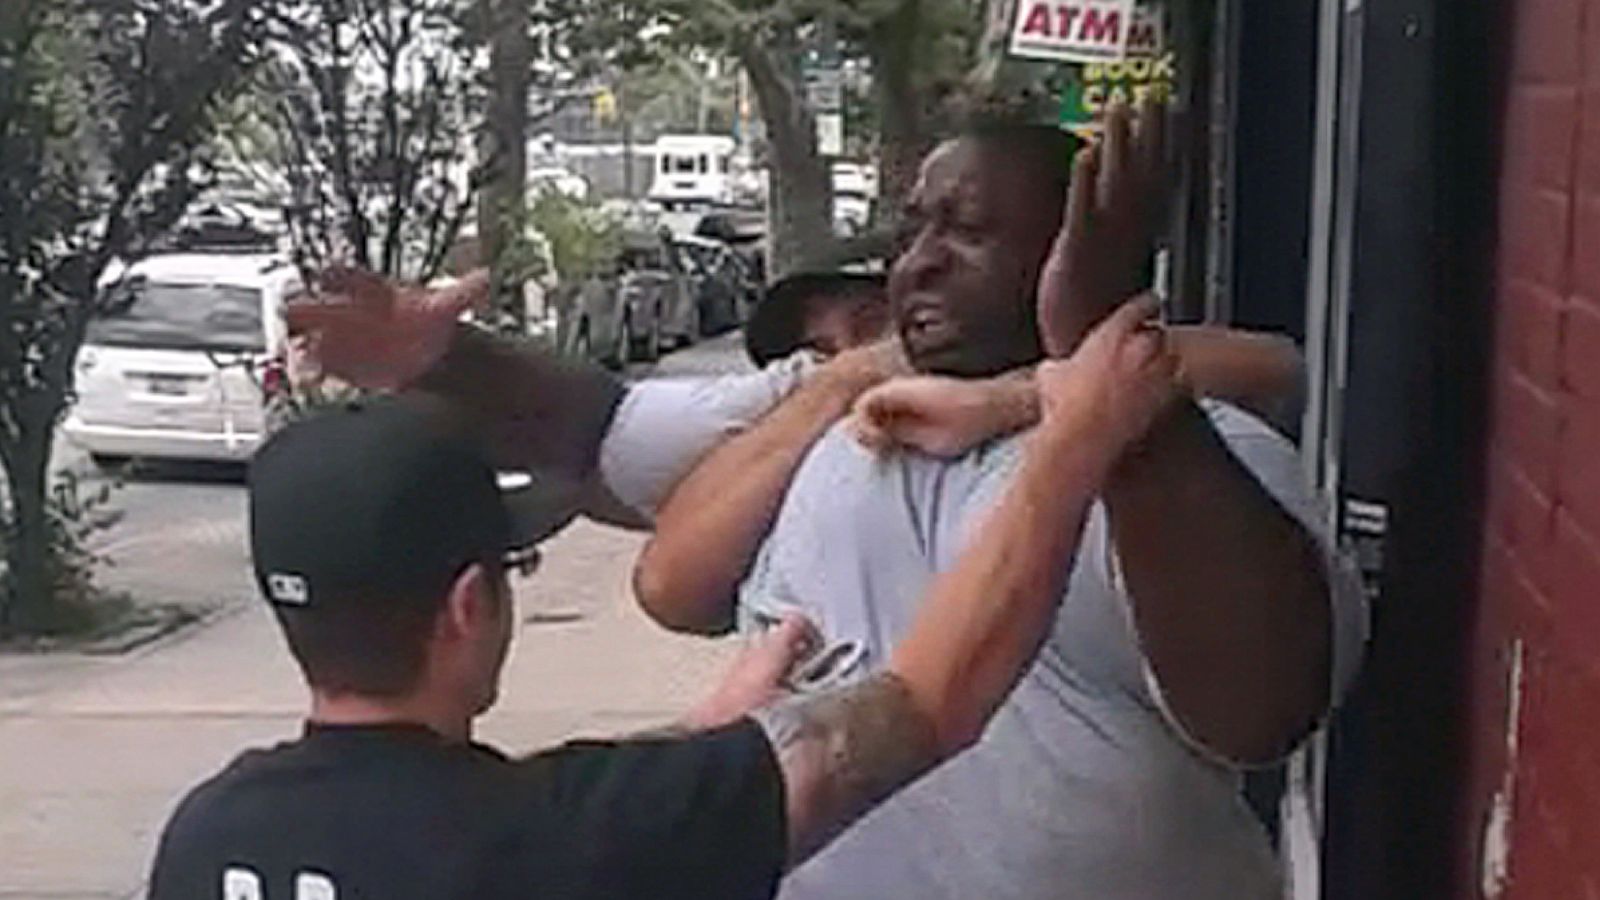 NYPD Chokehold Ruled a Homicide - ABC News